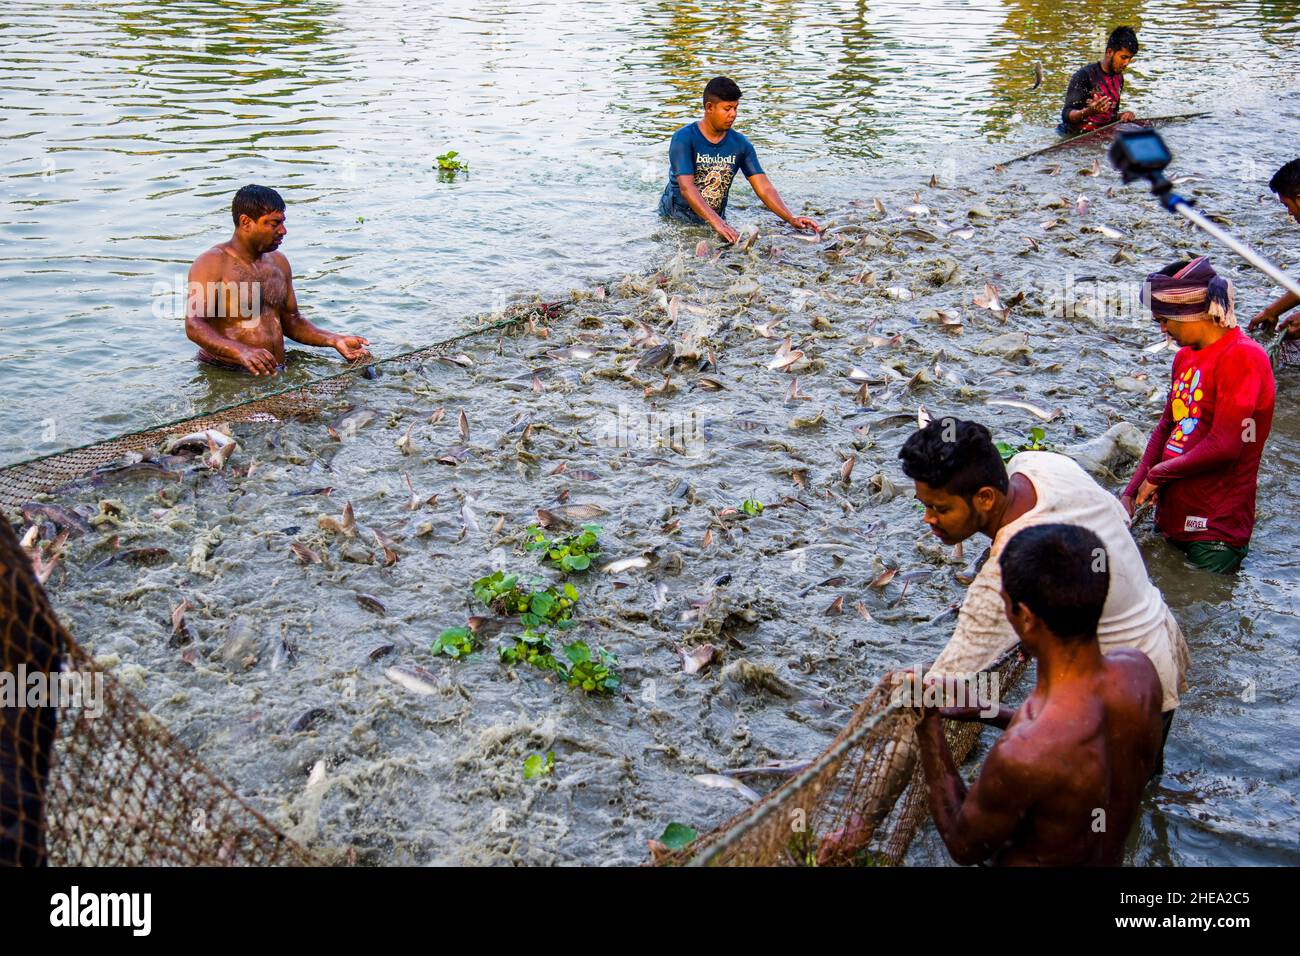 Fishers are harvesting pangas fish from a farm at Satkhira, Bangladesh. Pangas is one of the major cultured fish species which is popular for farming. Stock Photo